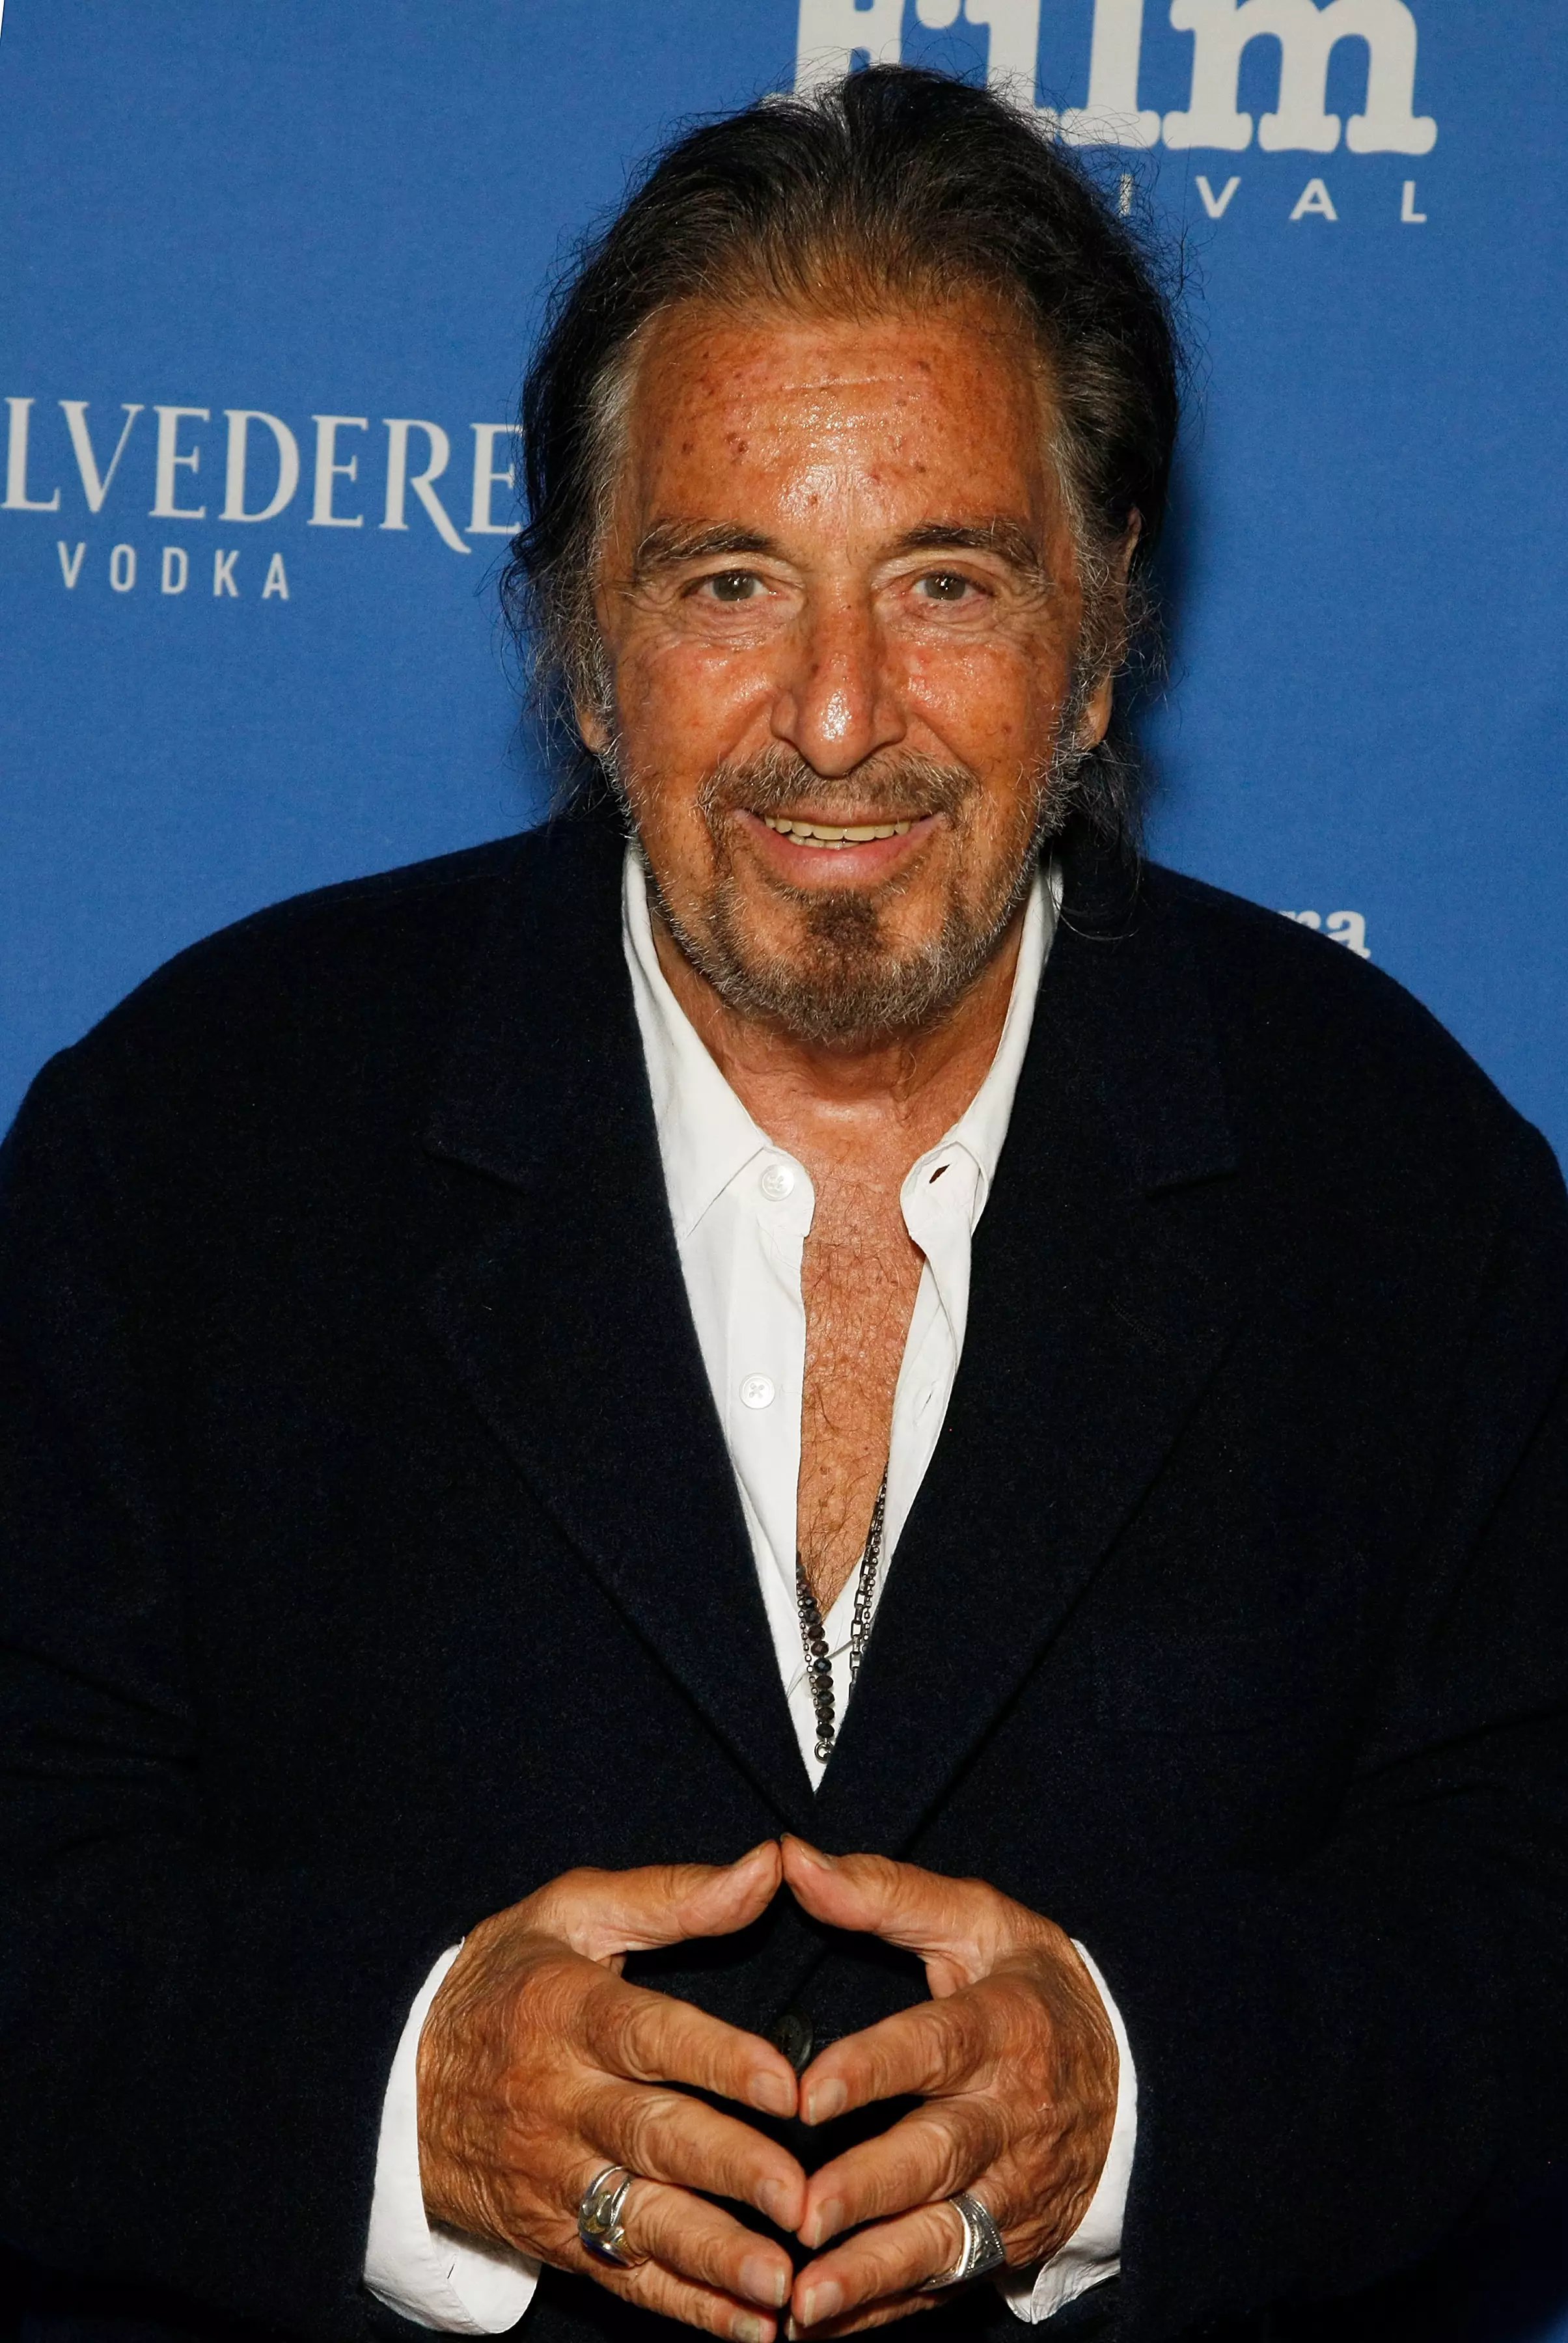 Al Pacino says he has taken on roles in bad films to try and make them better.